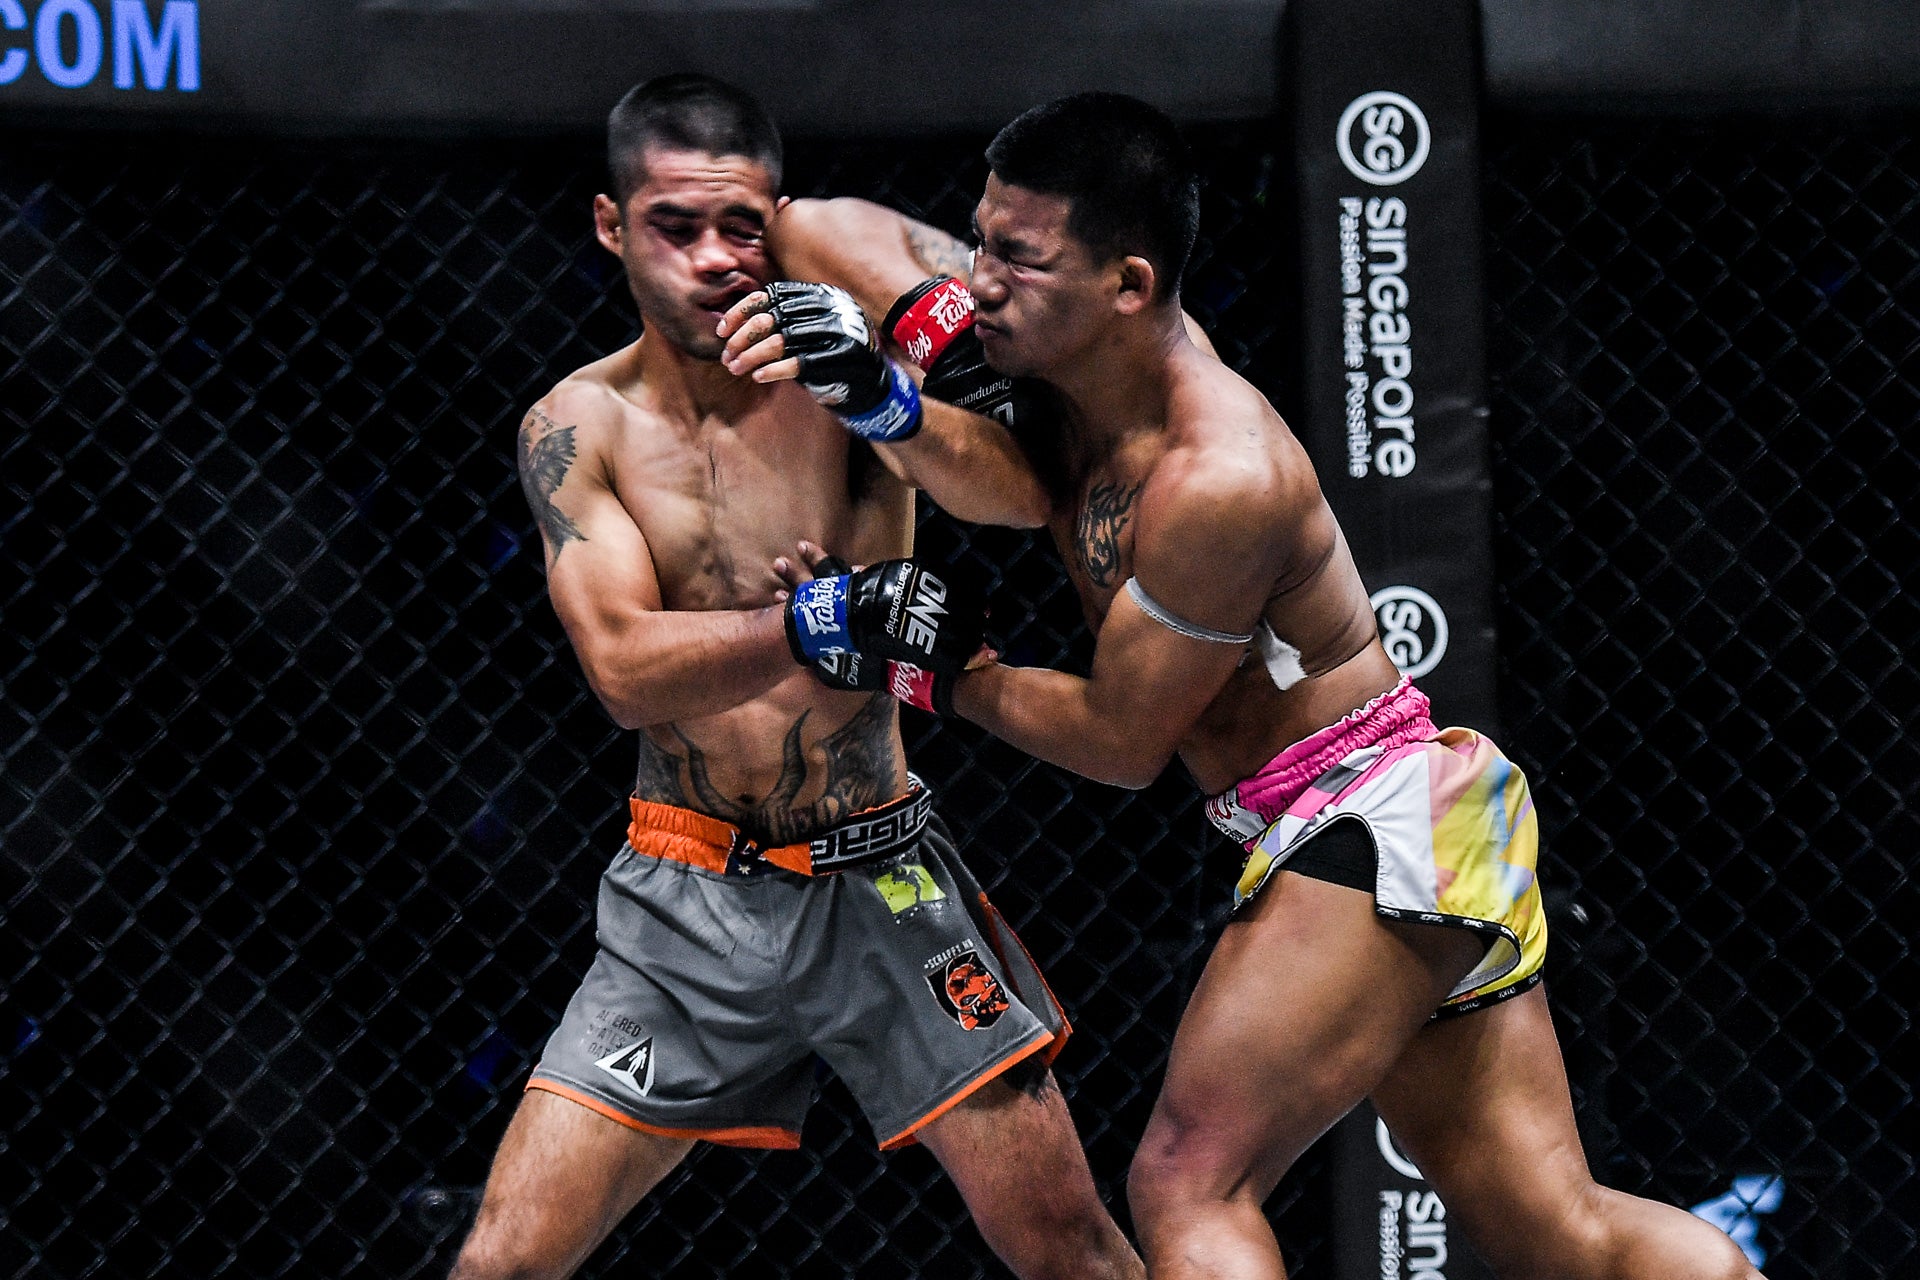 Rodtang Extends to 10fight Winning Streak on ONE Championship